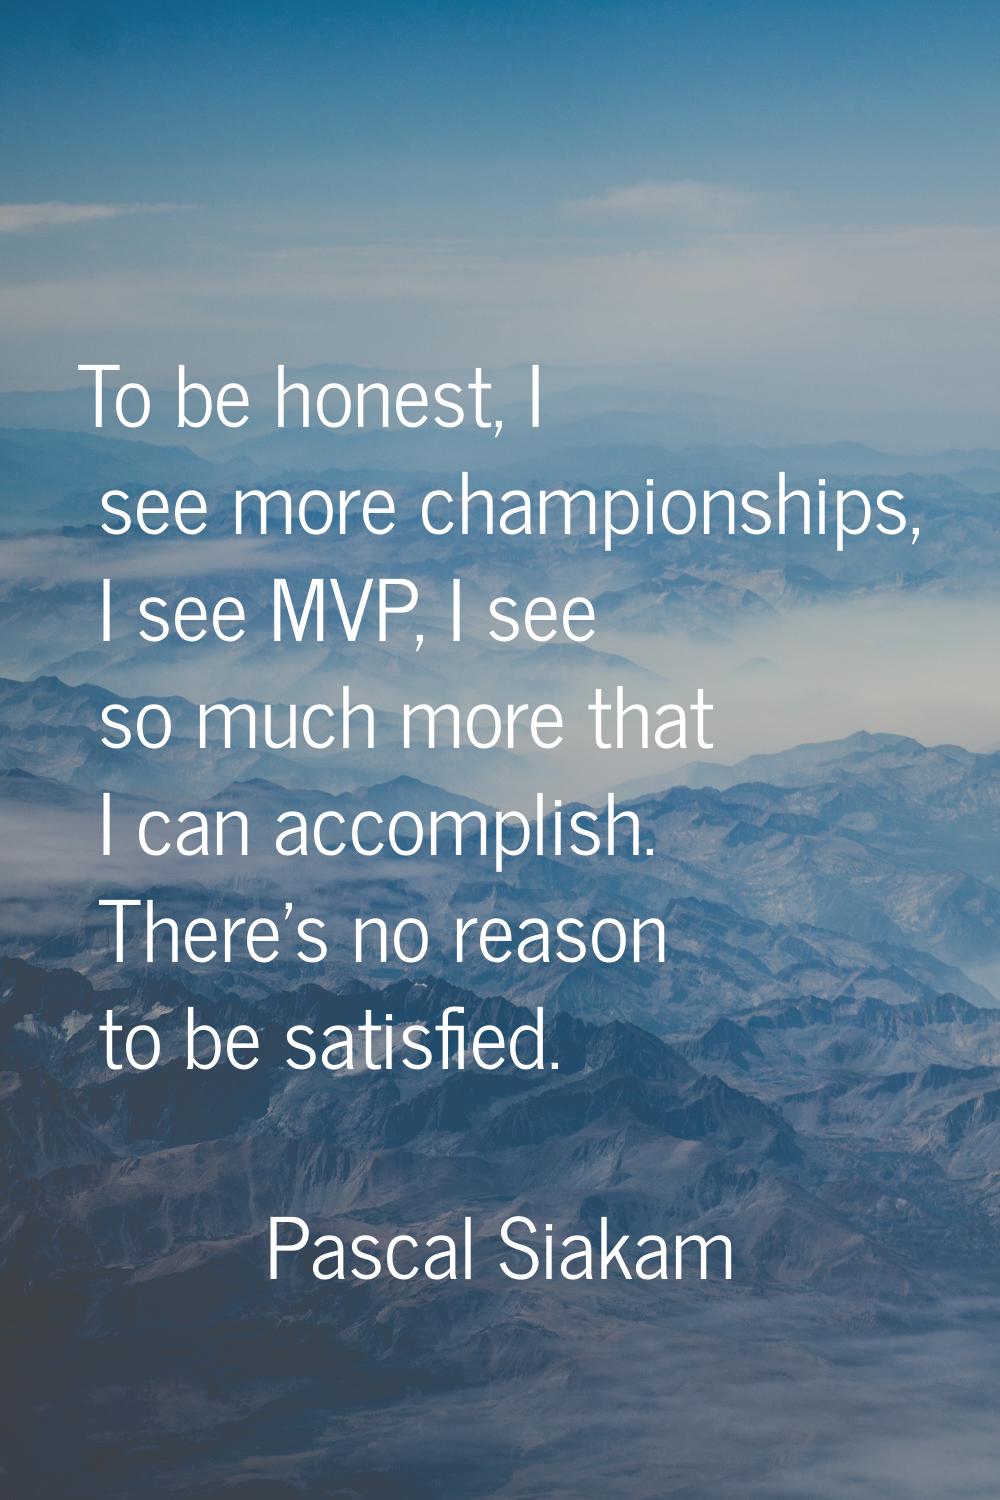 To be honest, I see more championships, I see MVP, I see so much more that I can accomplish. There'